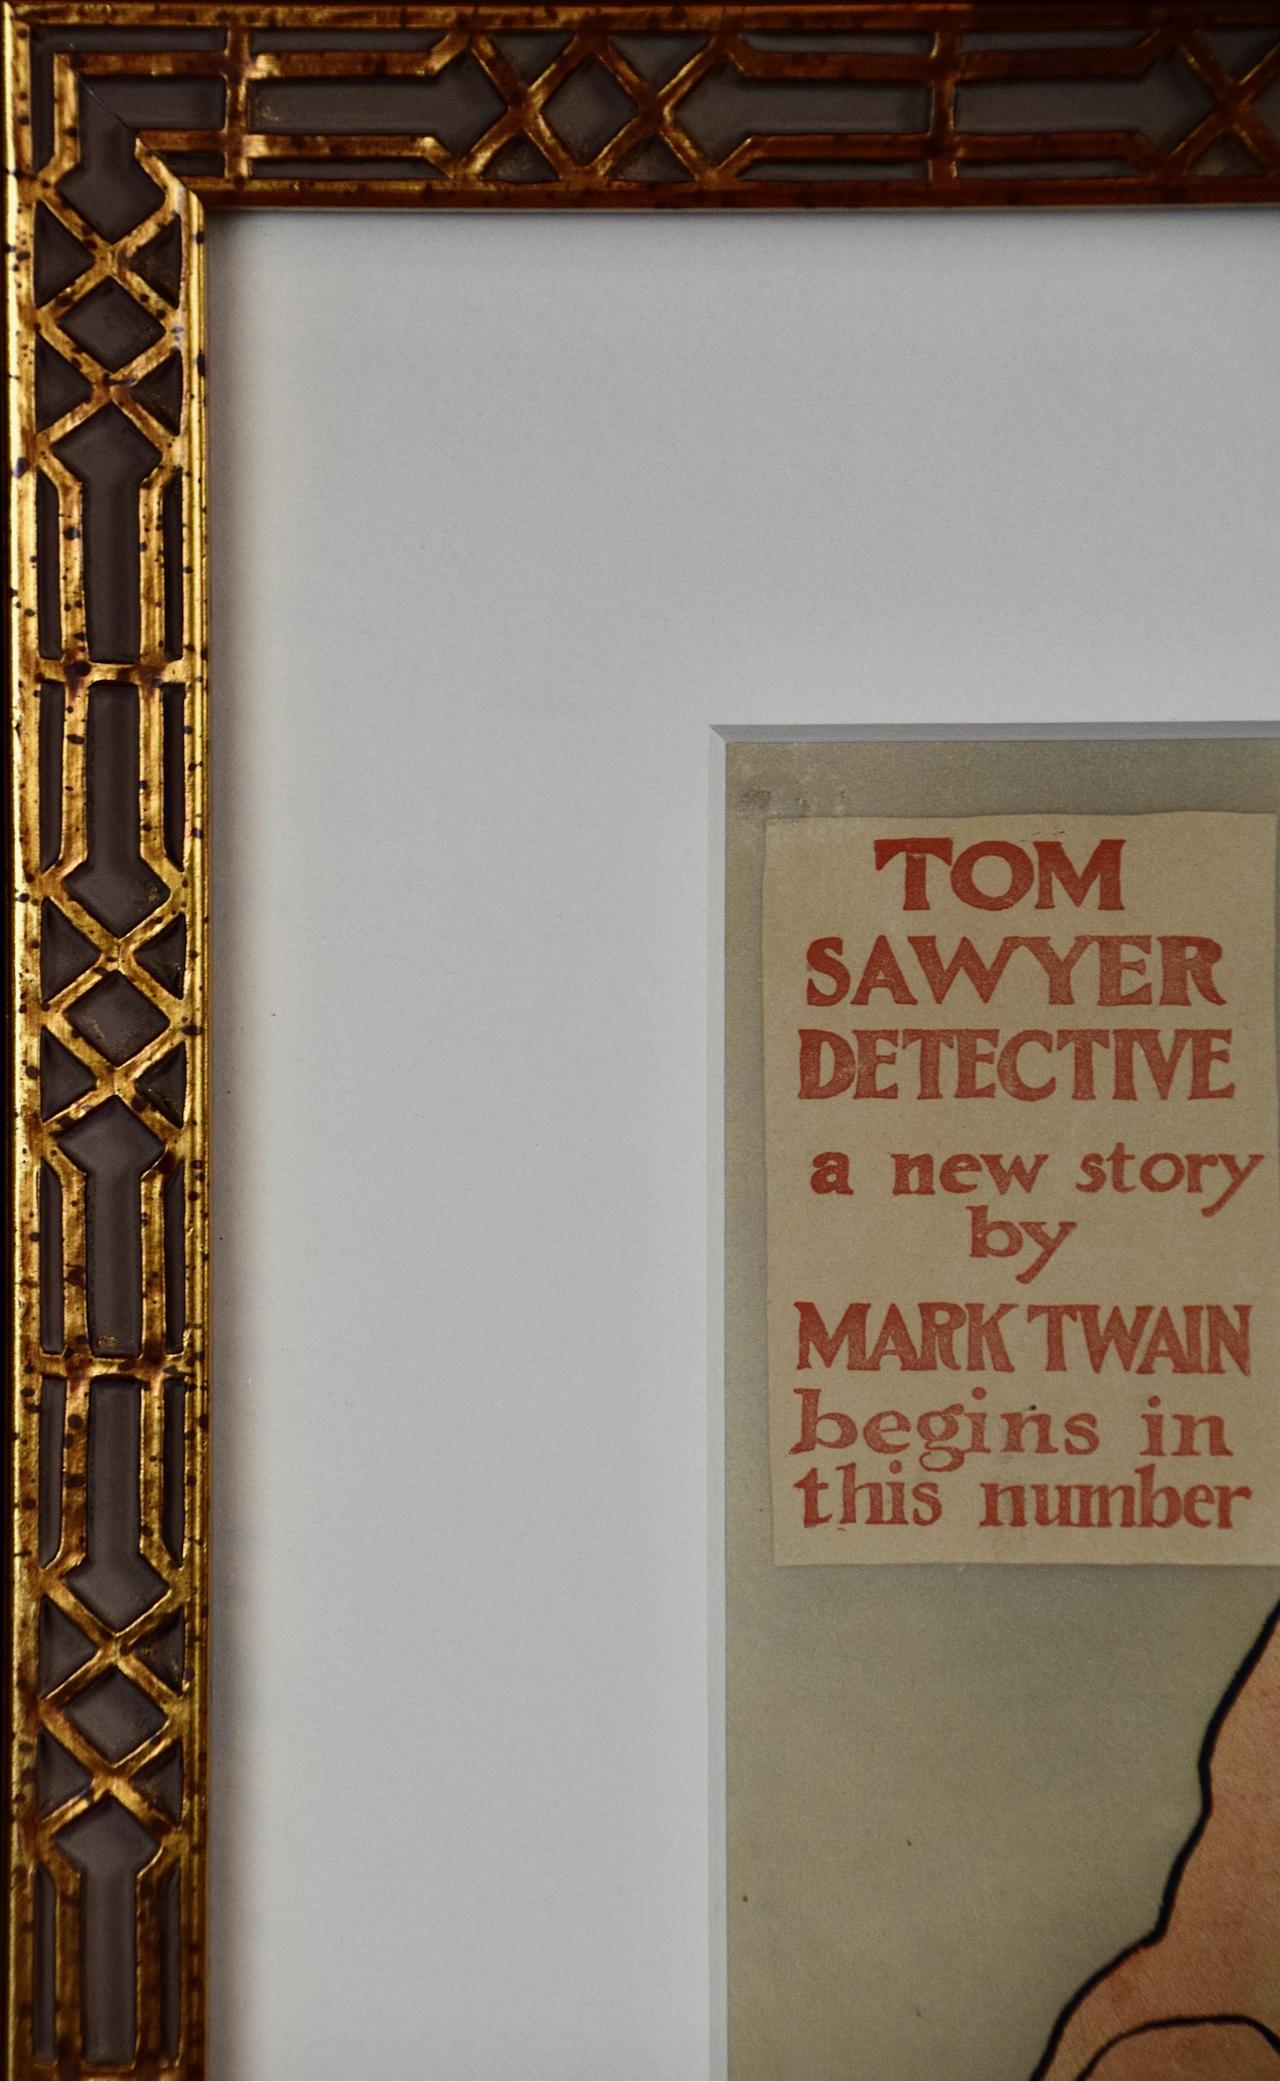 Tom Sawyer Detective by Mark Twain: 19th C. Framed Colored Poster  - Brown Print by Edward Penfield